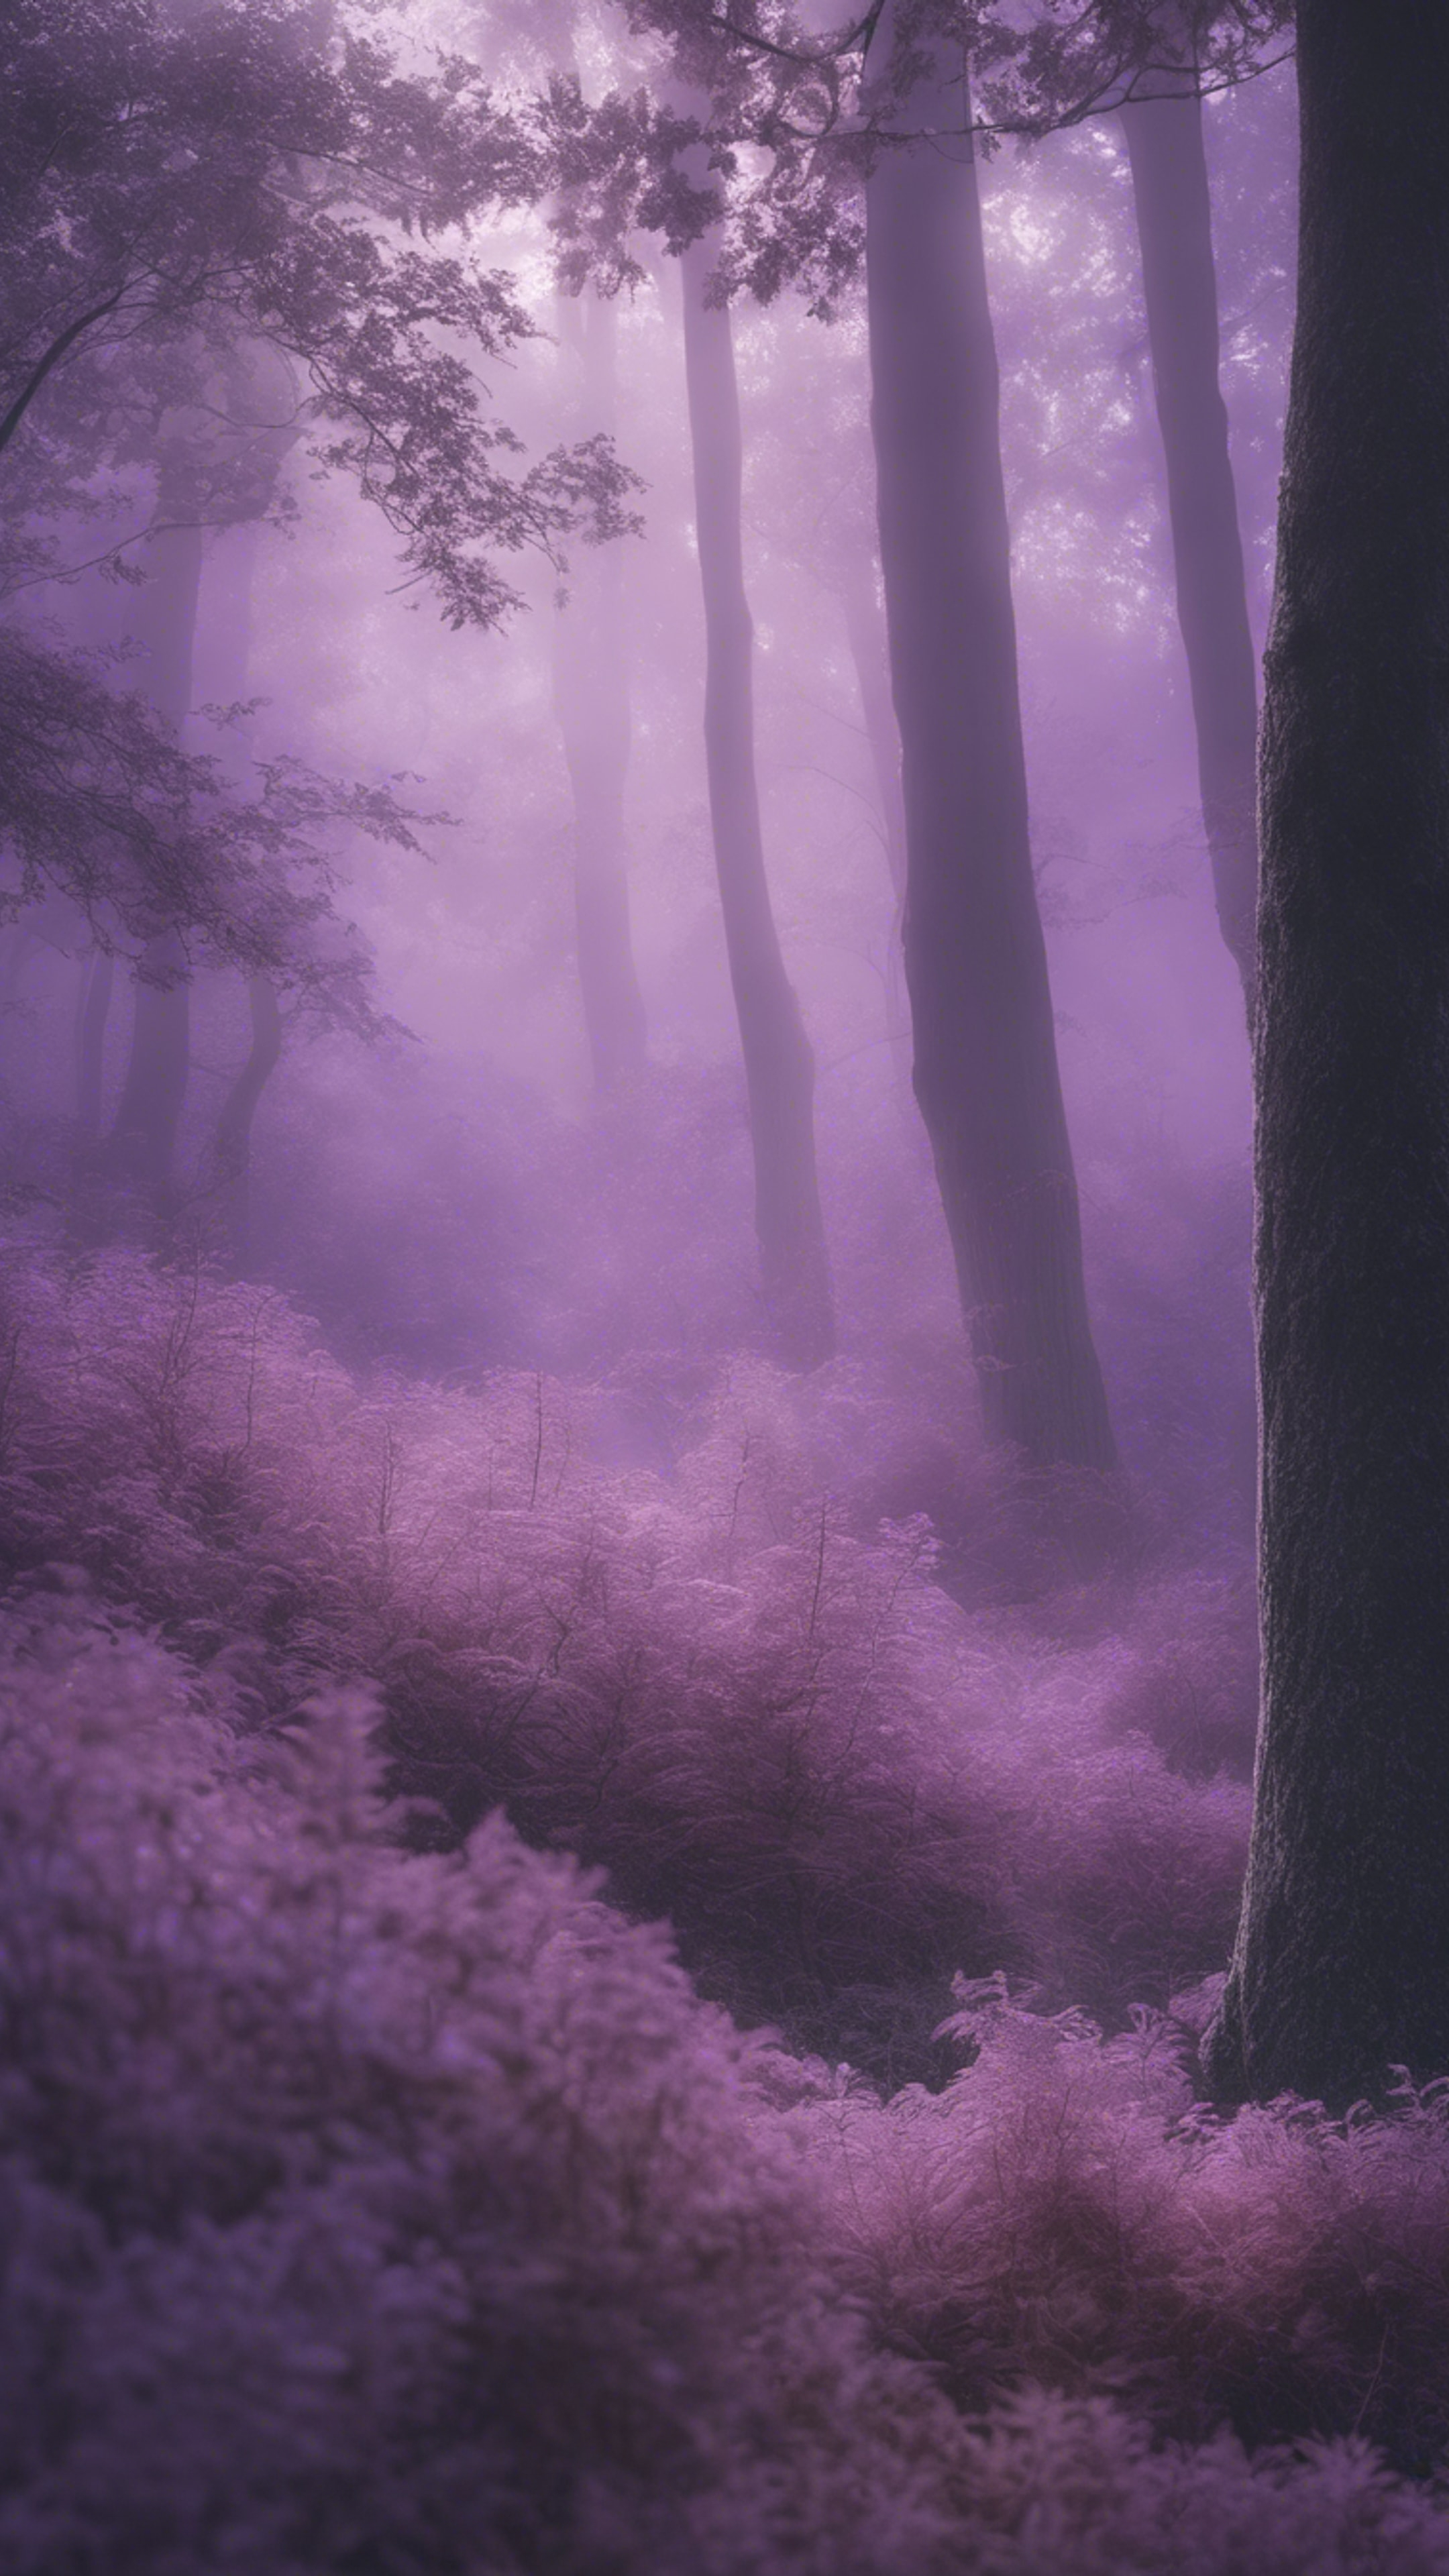 Ethereal scene of a tranquil forest bowed under a silky layer of light purple fog. Tapet[581b7126aa2a4d368dd8]